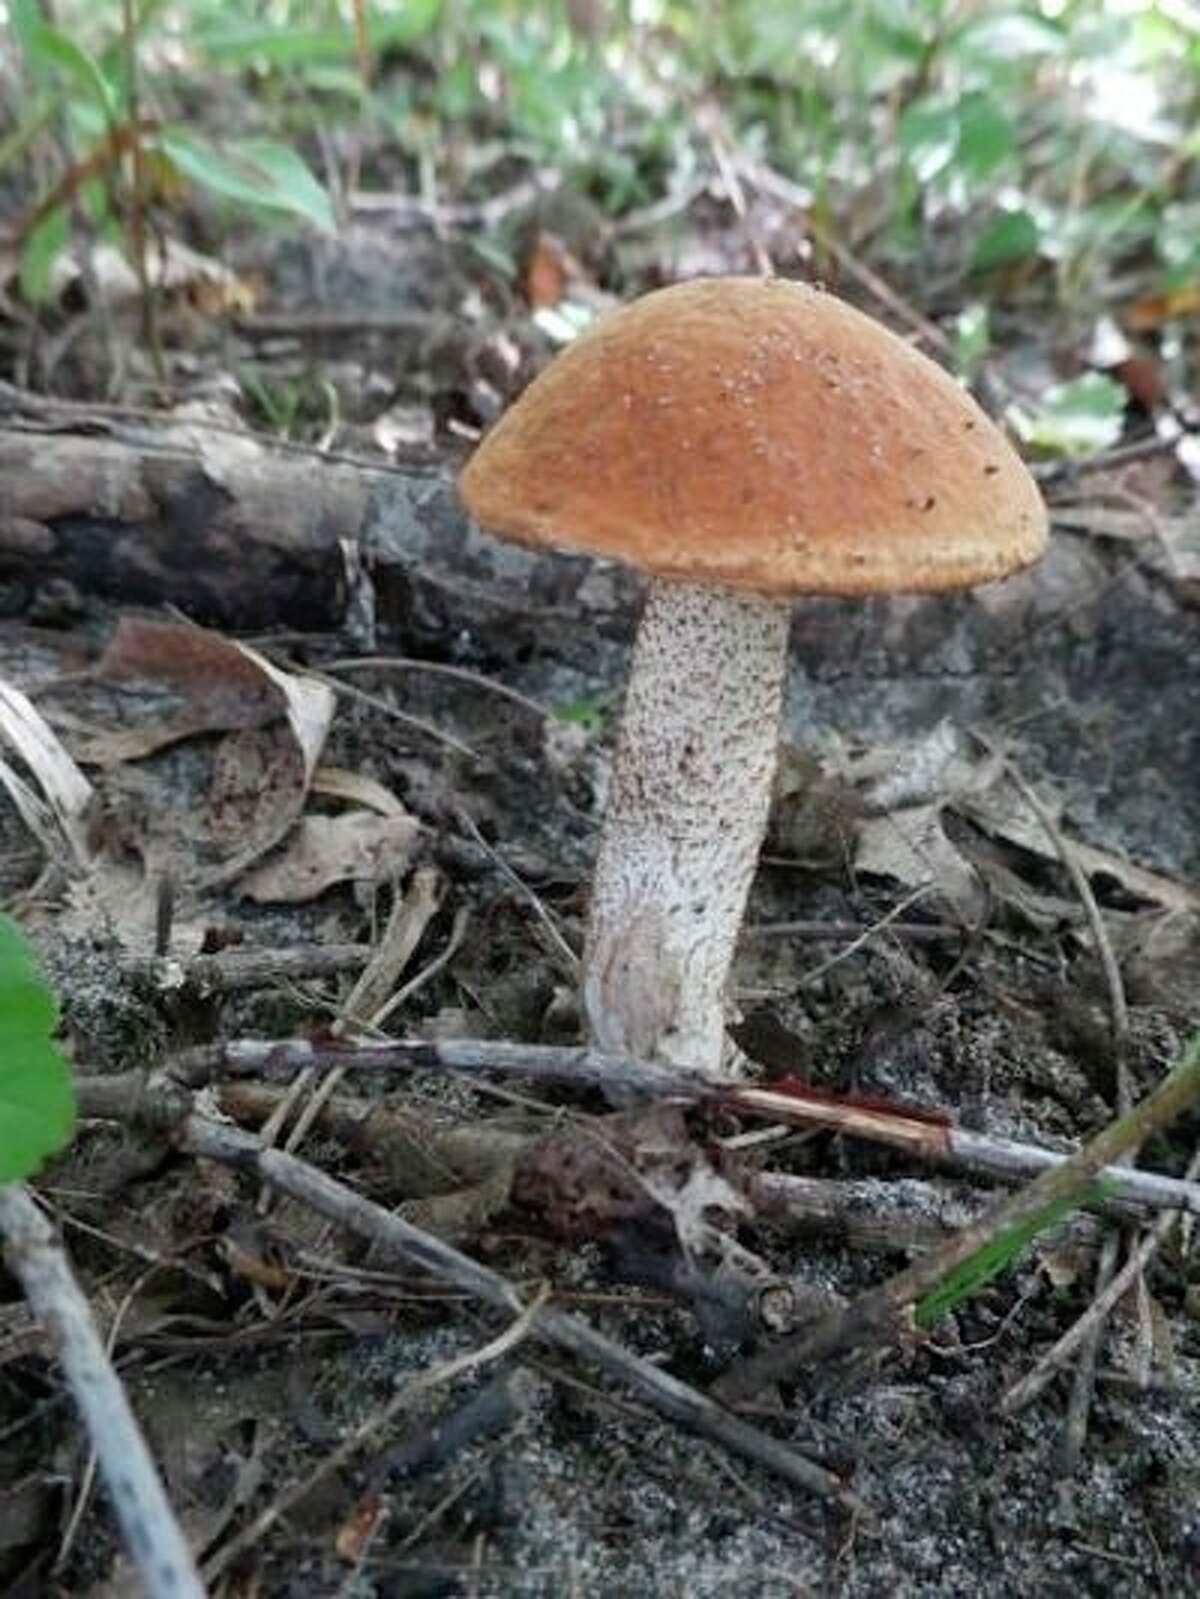 This is a photo of an Aspen Bolete mushroom on the forest floor. (Submitted Photo)